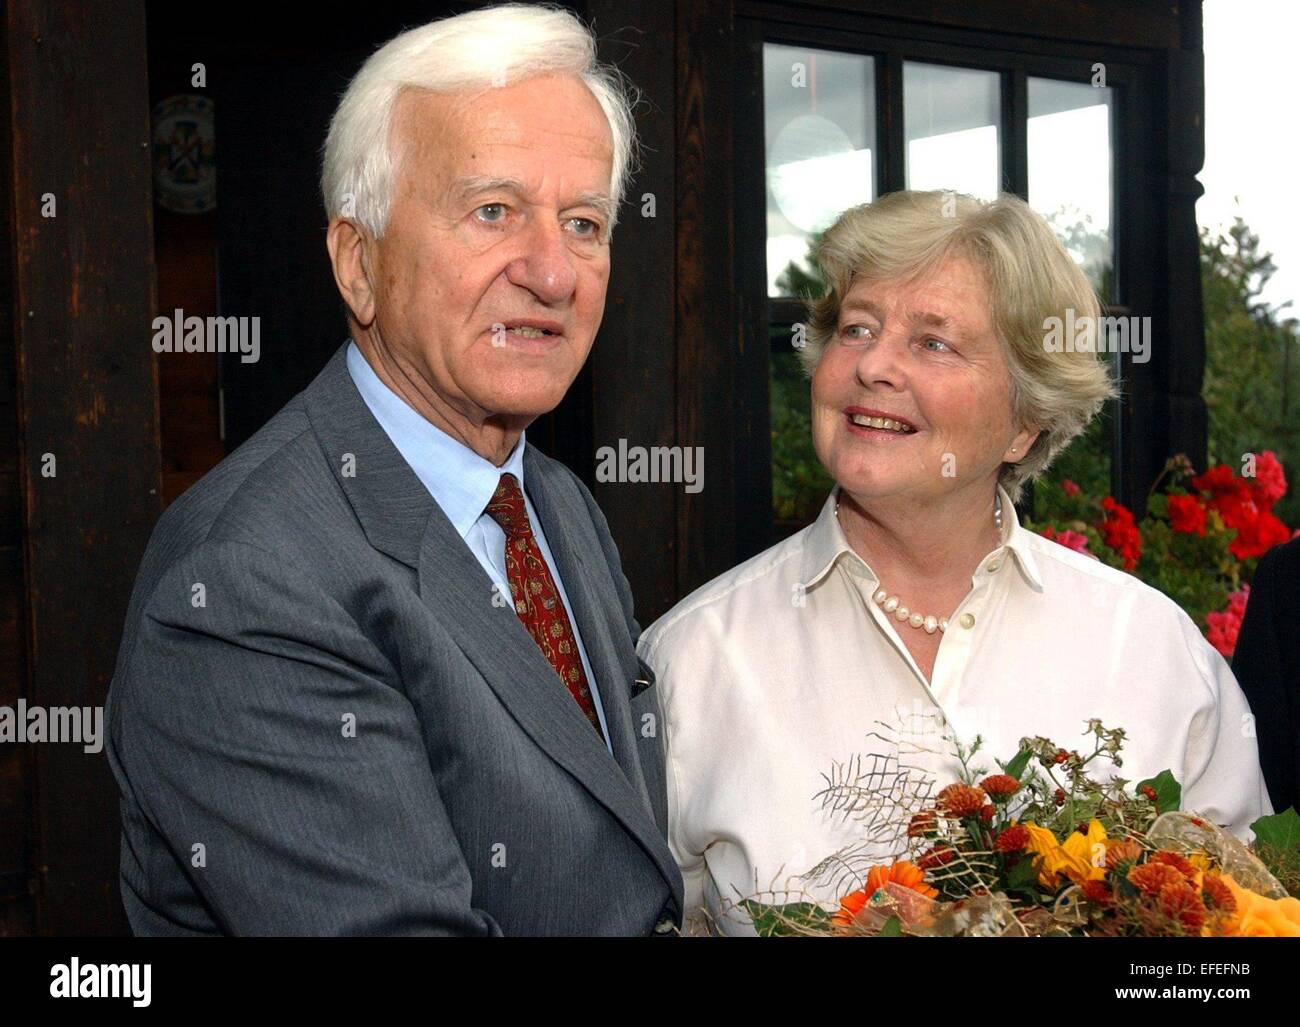 FILE - A file picture dated 10 October 2003 shows the late former German President Richard von Weizsaecker and his wife Marianne celebrating their golden wedding anniversary in Wackersberg, Germany. Von Weizsaecker died on 30 January 2015 at the age of 94. Photo: Frank Maechler/dpa Stock Photo